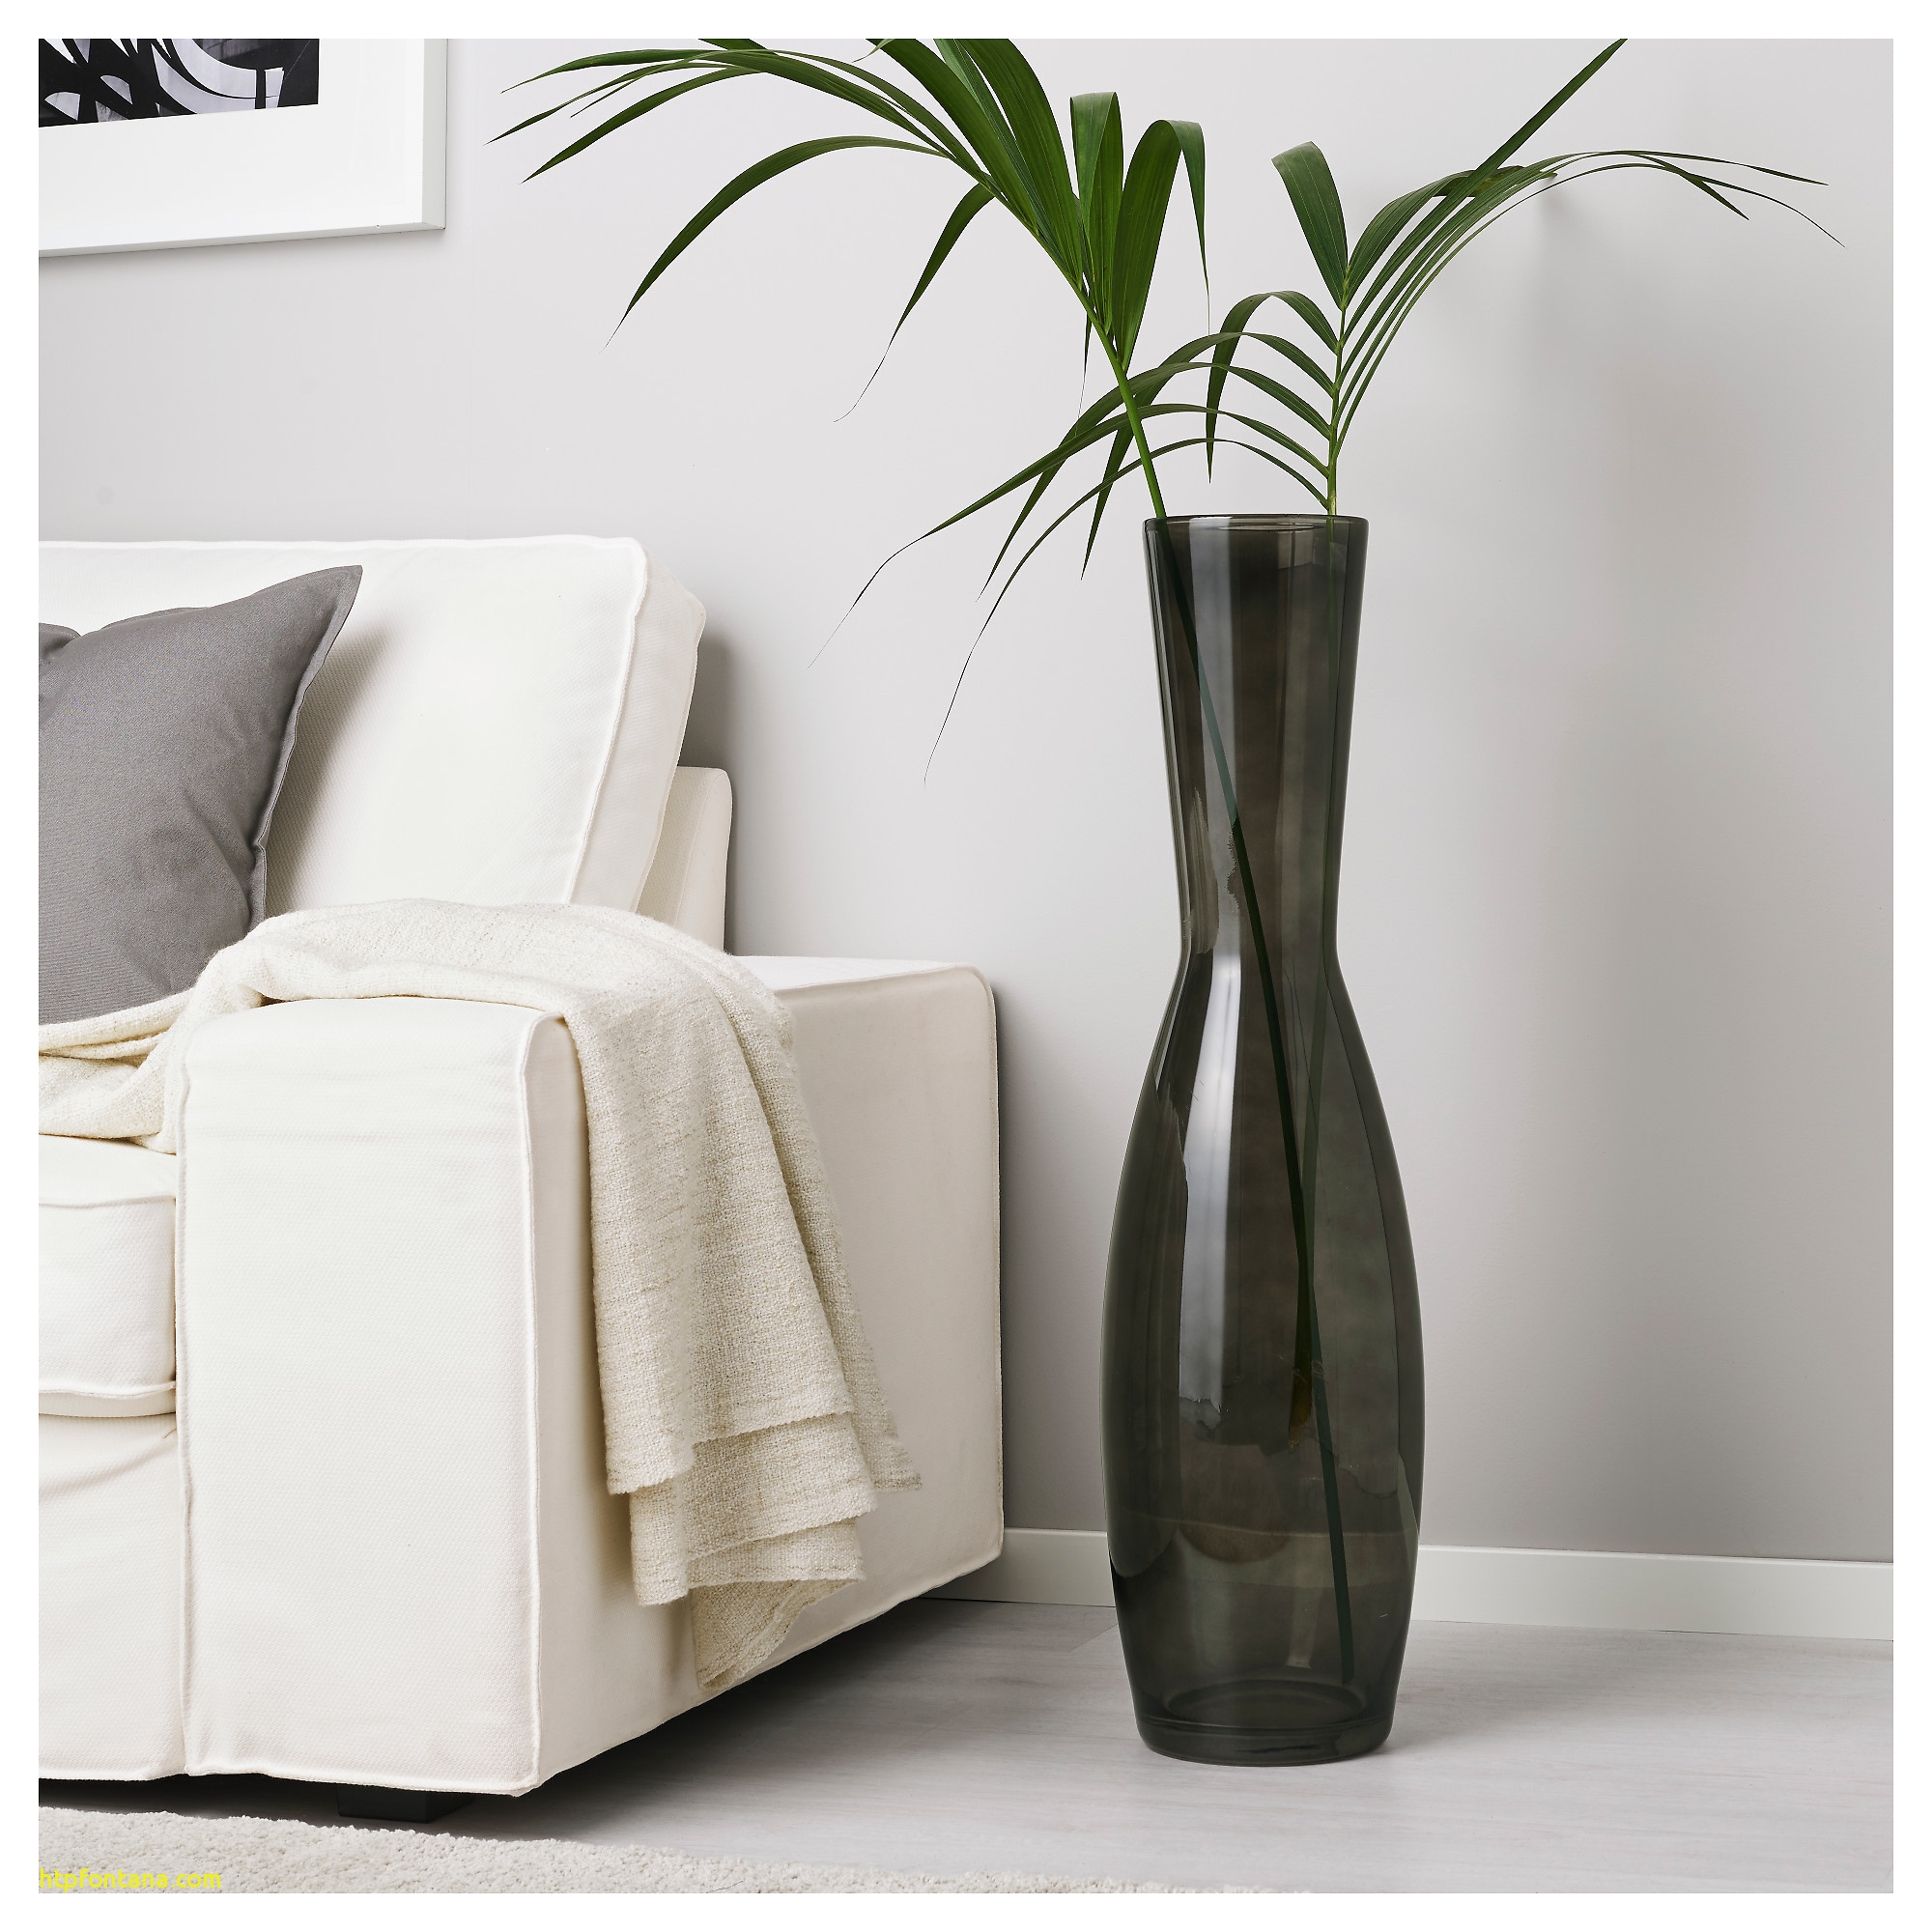 10 Lovable Large Vases for Living Room 2024 free download large vases for living room of living room idea pics luxury floor vases with branches extra tall intended for living room idea pics luxury floor vases with branches extra tall standing vase 